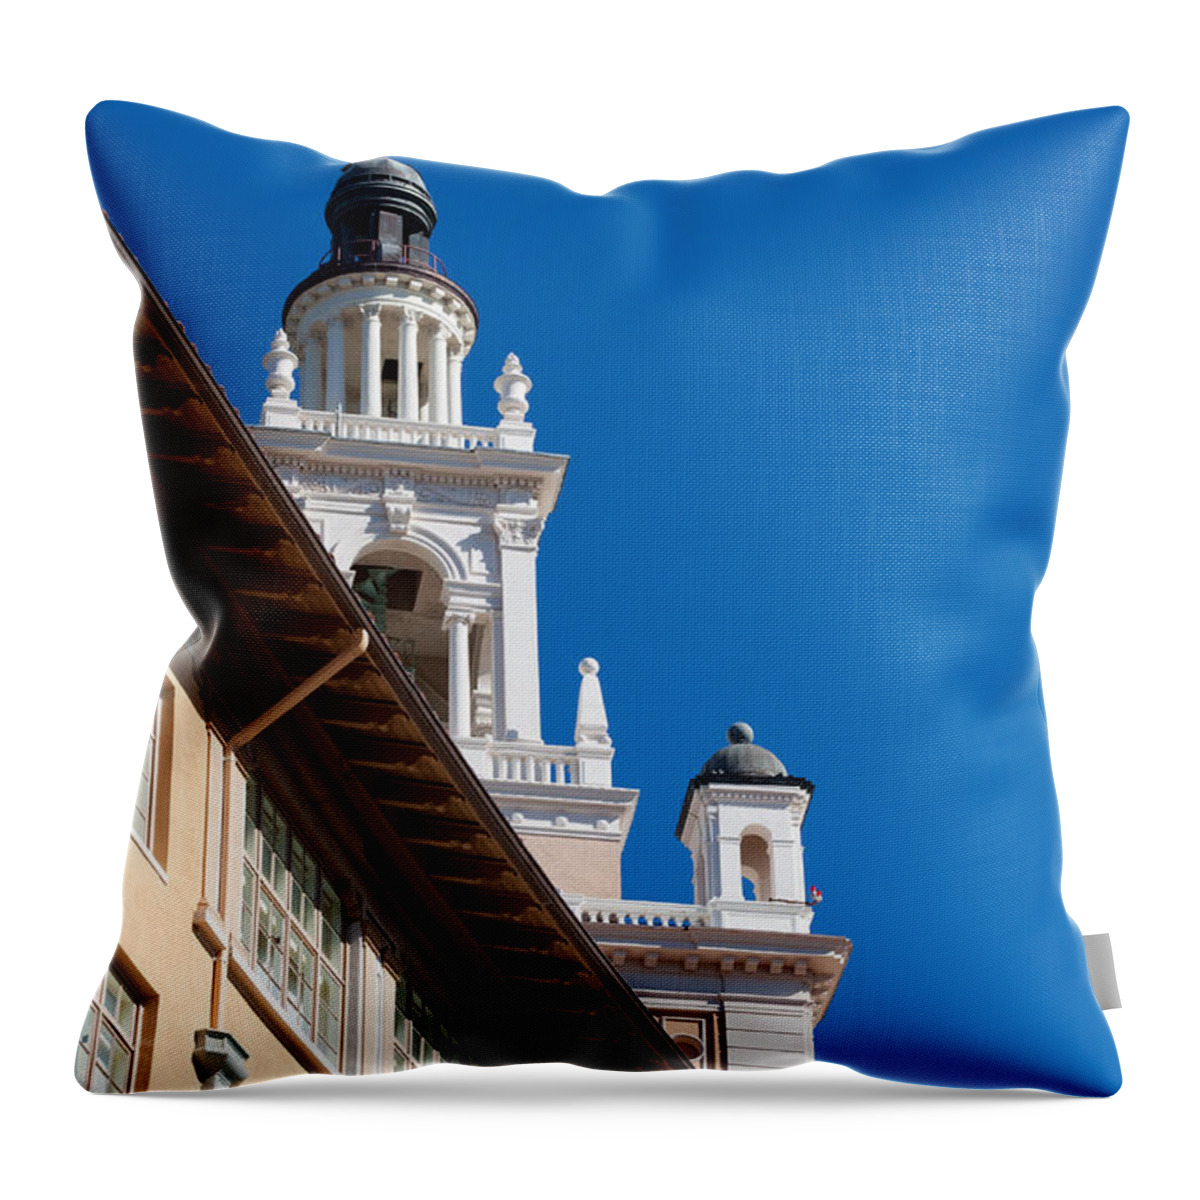 Biltmore Throw Pillow featuring the photograph Coral Gables Biltmore Hotel Tower by Ed Gleichman